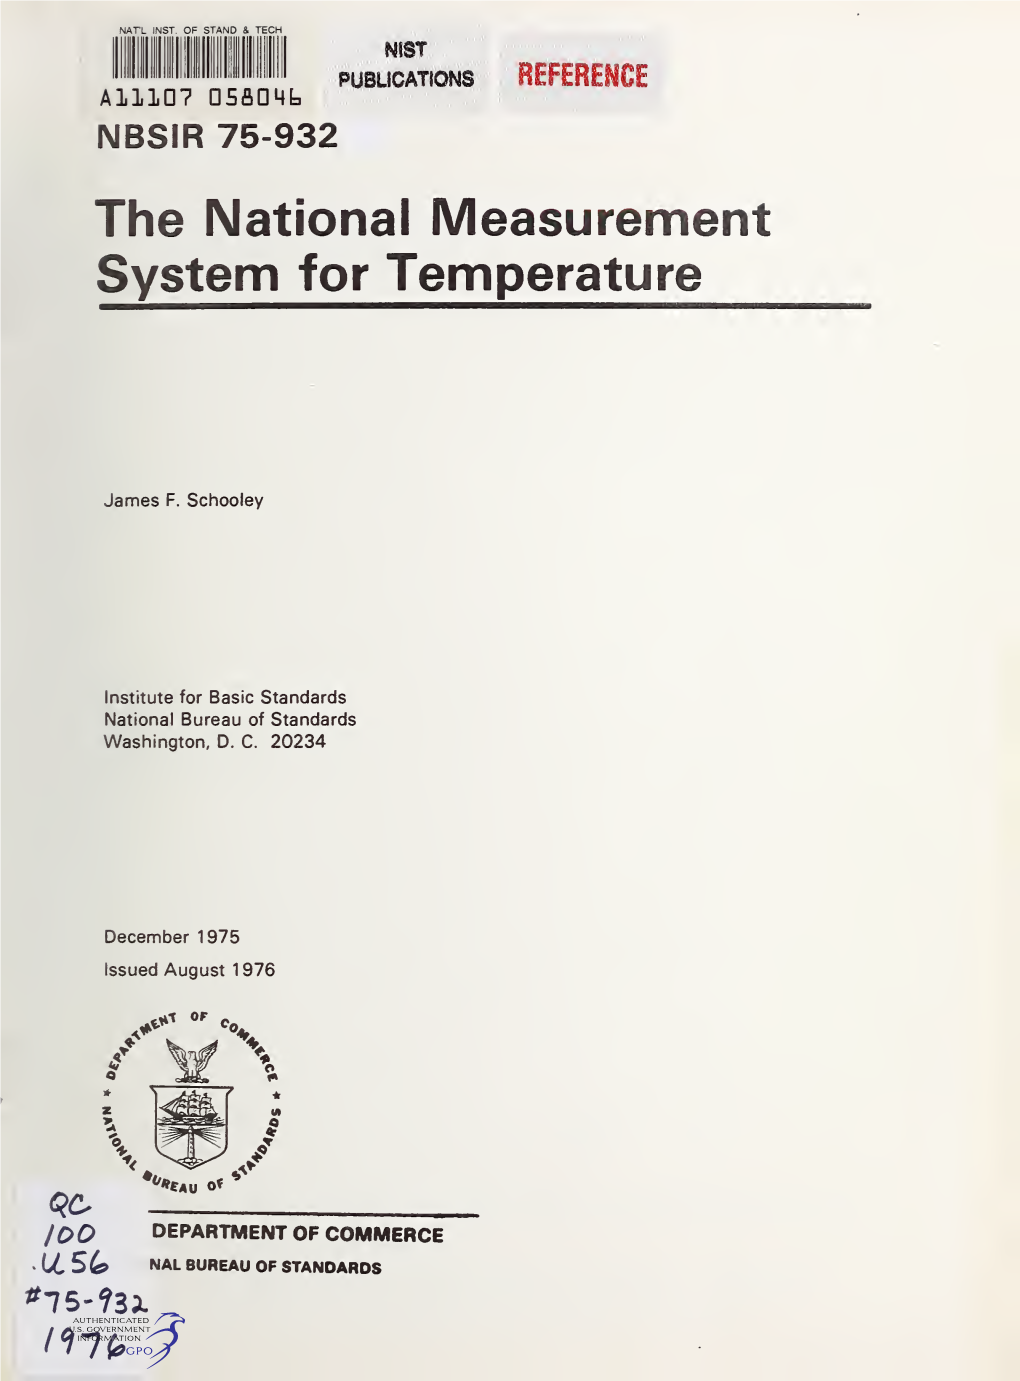 The National Measurement System for Temperature